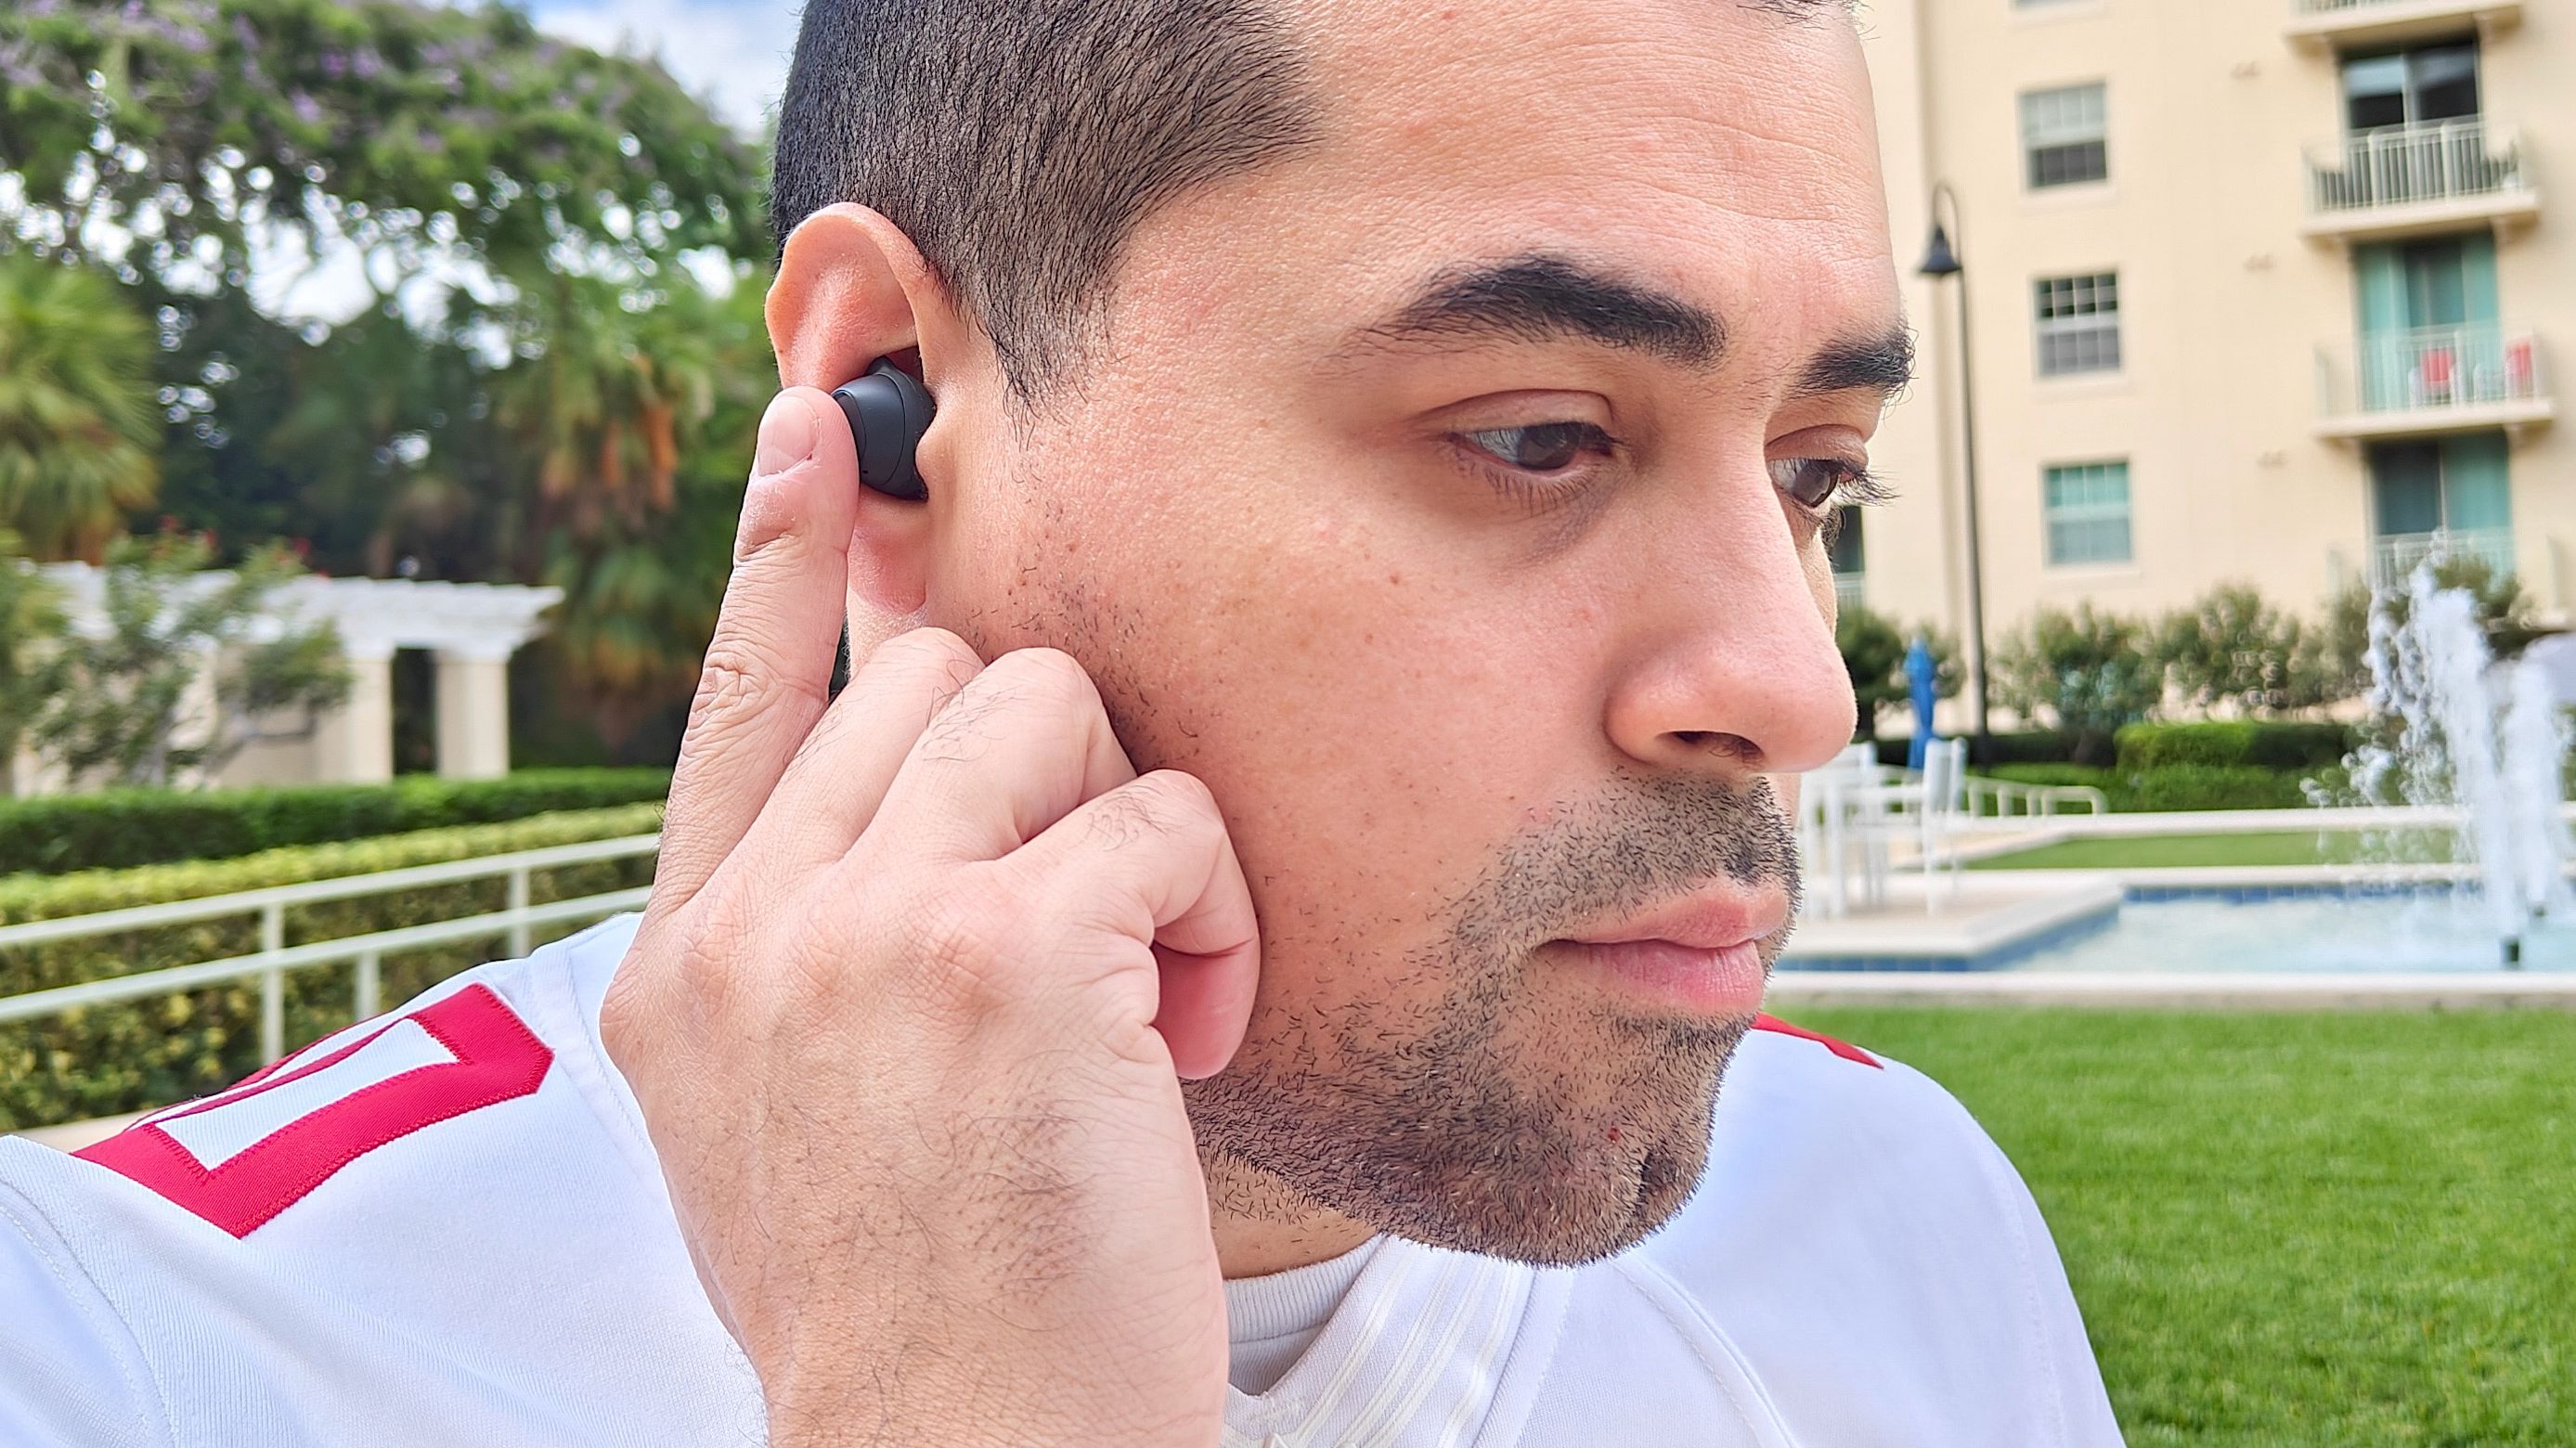 Galaxy Buds FE Finally Confirmed with a Ton of Information Now Available  for the Public